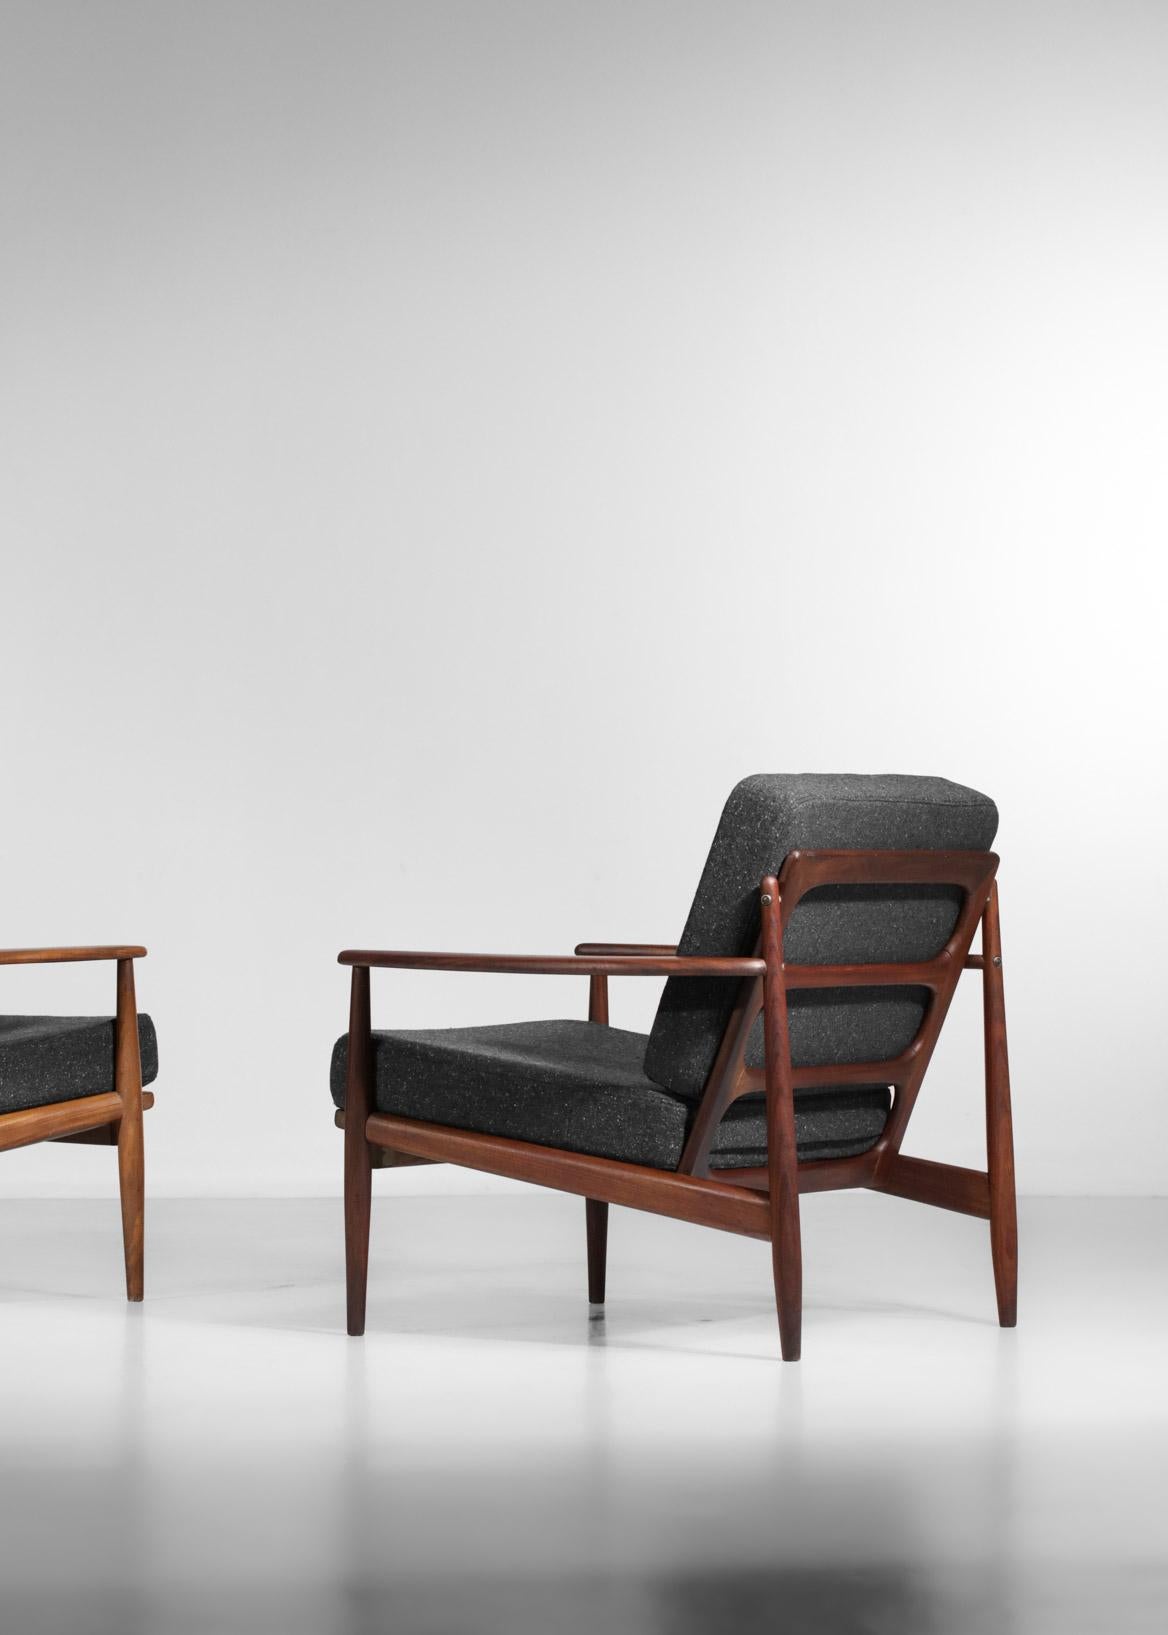 Pair of Danish armchairs from the 60's typical of the Scandinavian design of the time. Solid teak structure, seats refurbished in black wool from Bisson Bruneel. Excellent vintage condition (see pictures). Different teak species for the two